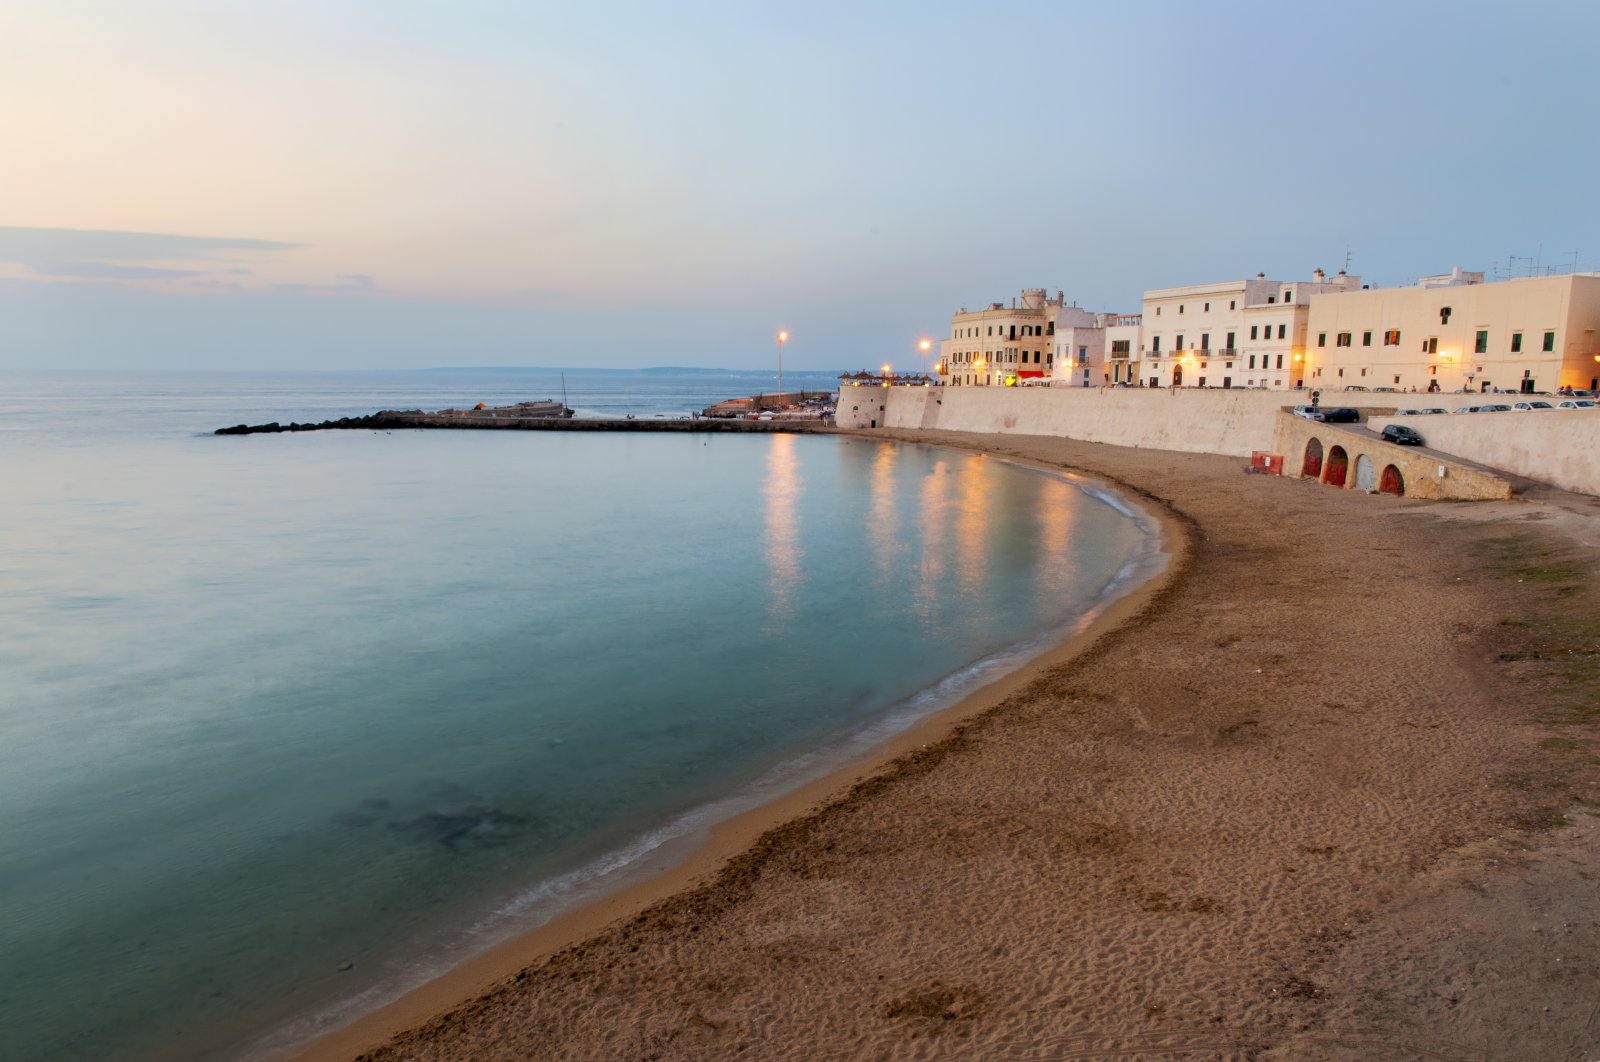 Beach and waterfront buildings at dusk, Lecce, Italy, Jan 1, 2014. (Getty Images)